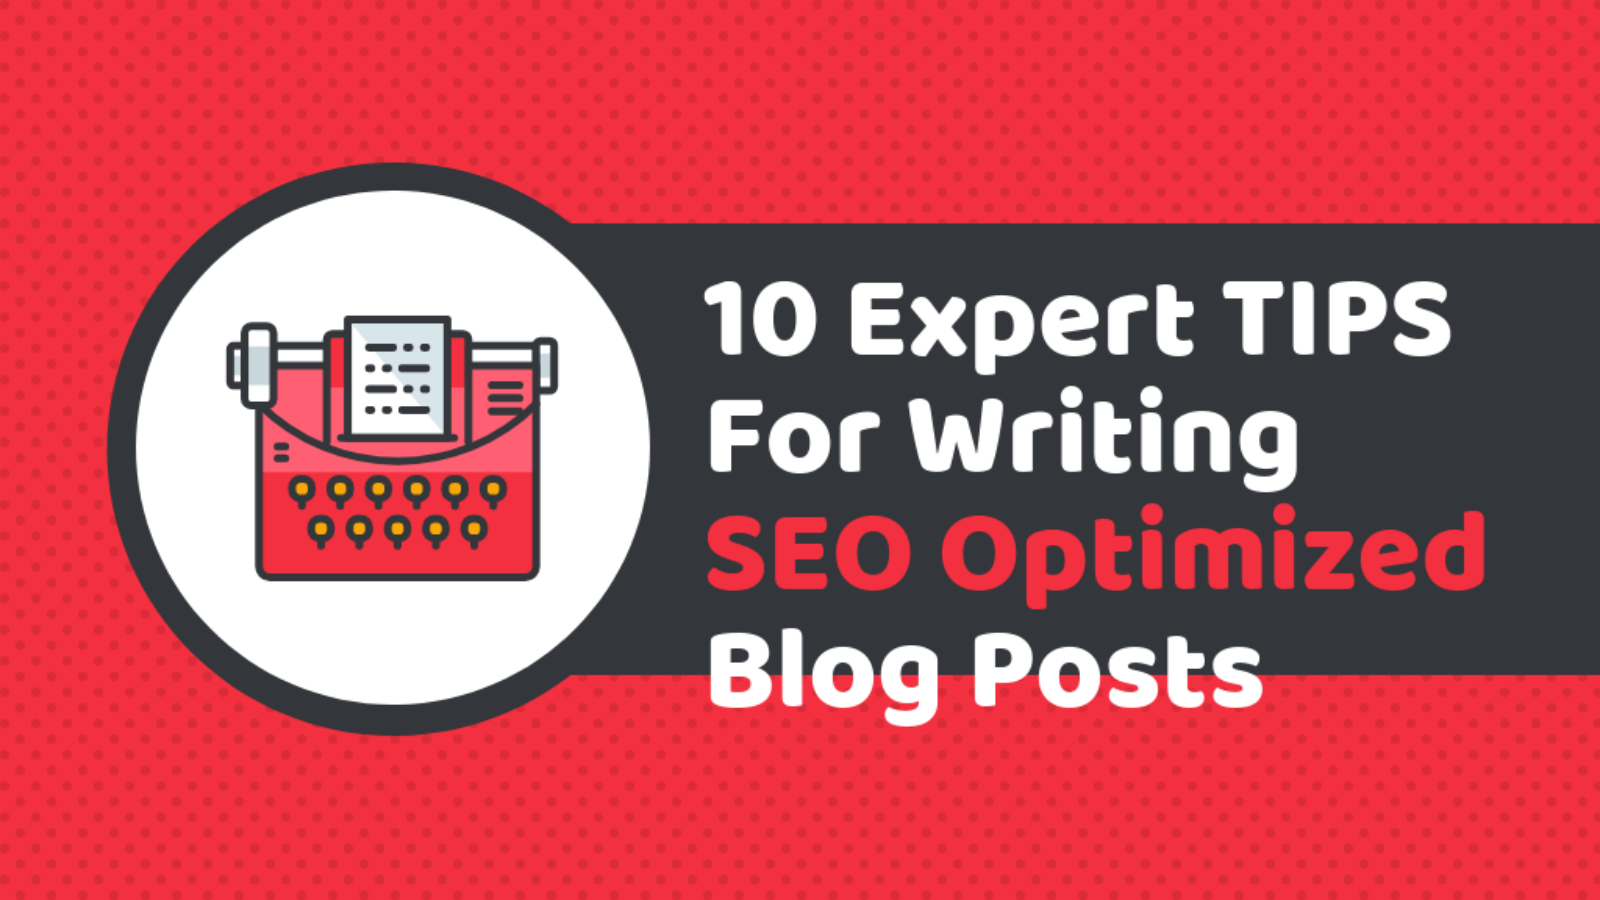 10 Expert Tips For Writing SEO Optimized Blog Posts